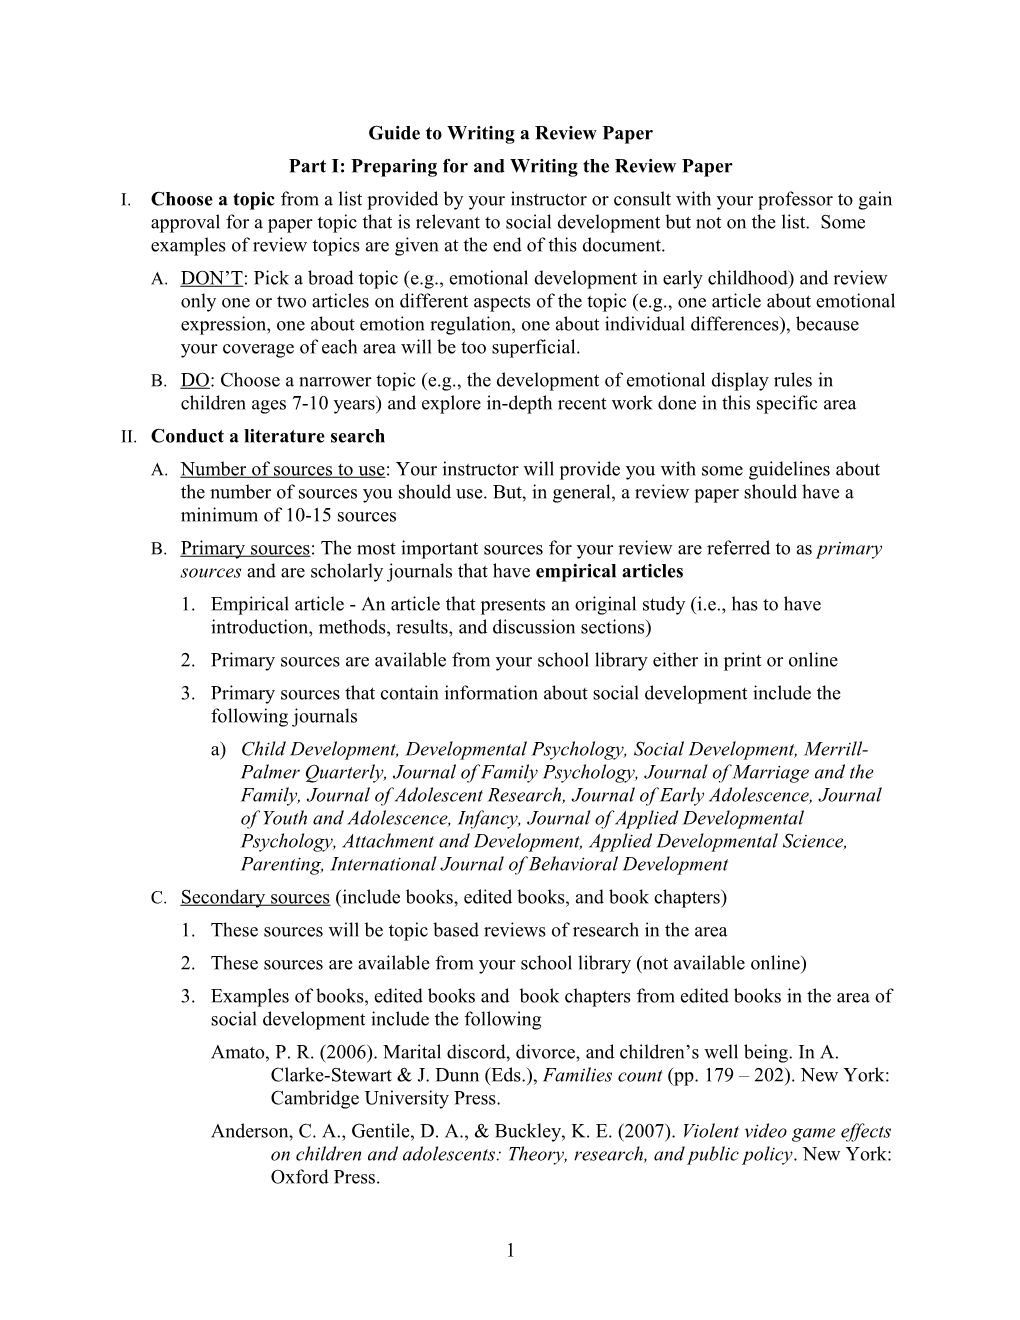 Guide to Writing a Review Paper